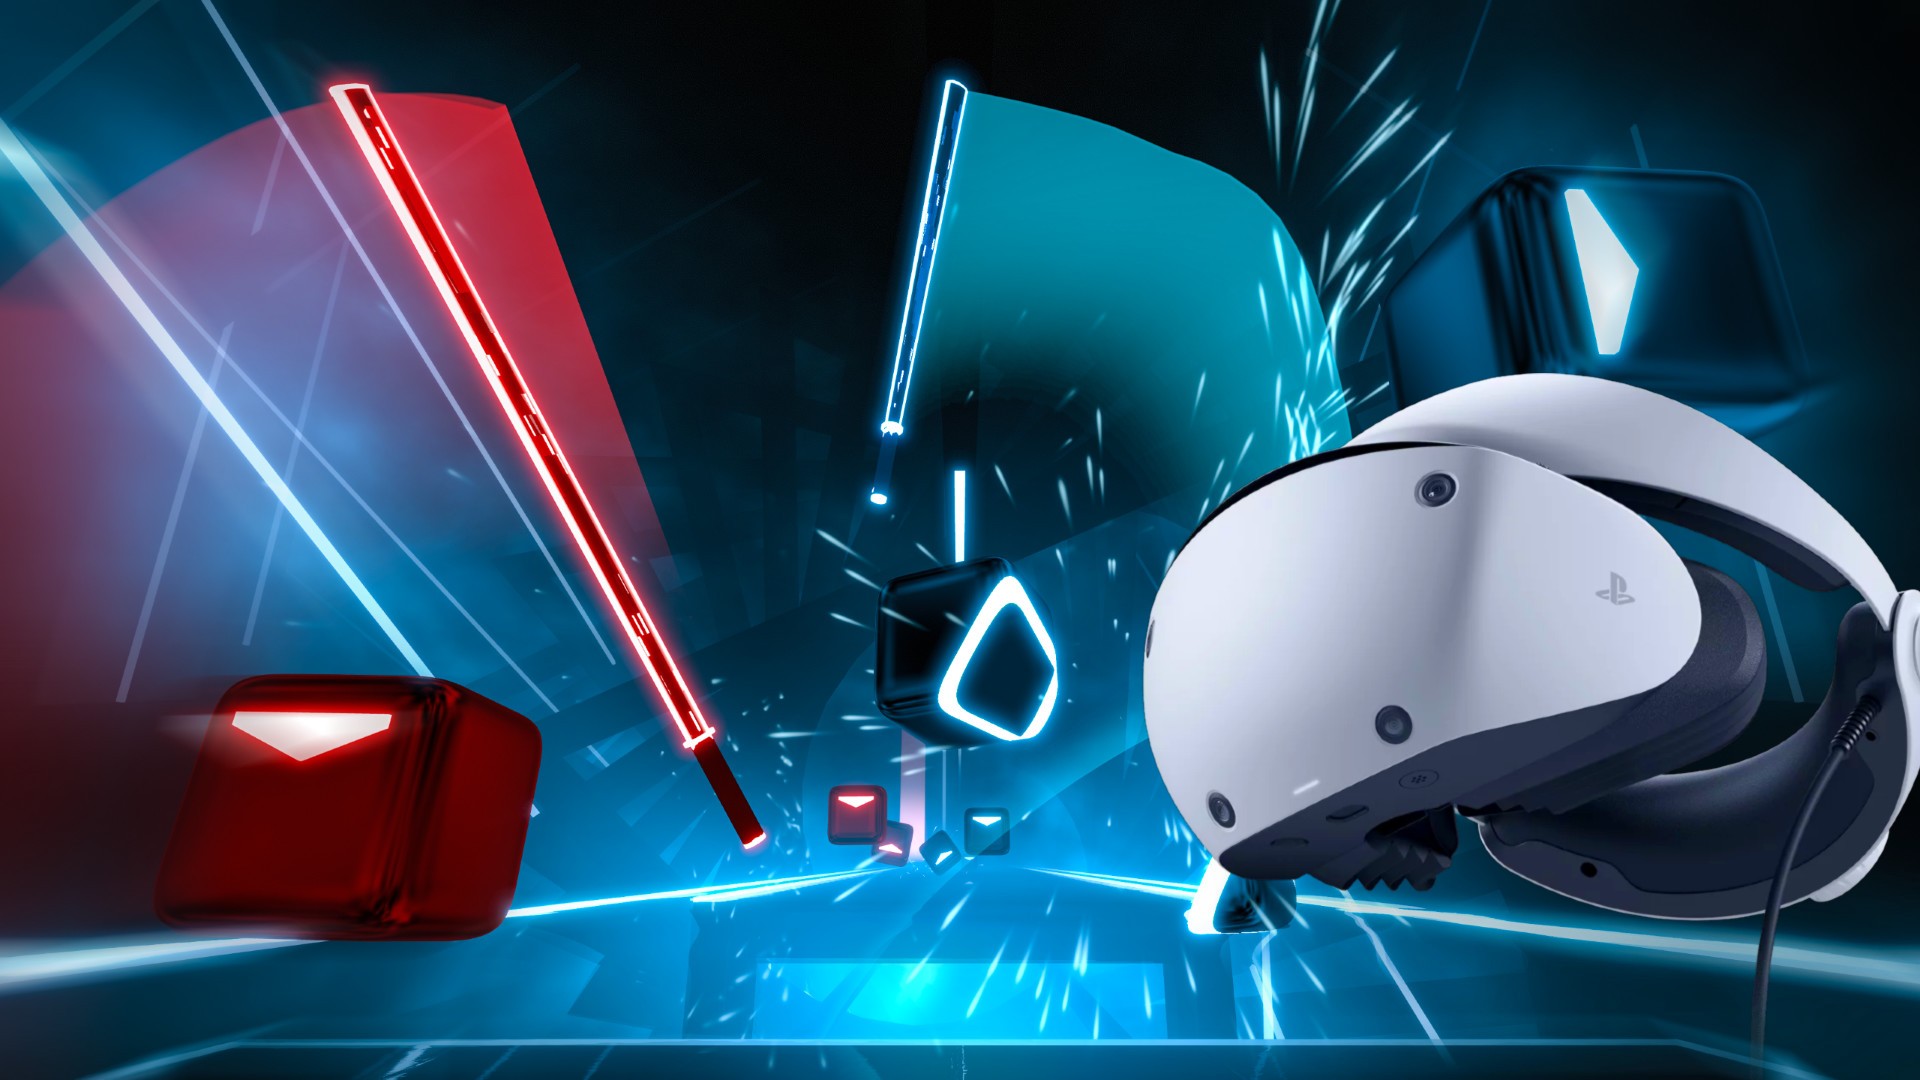 ‘Beat Saber’ Finally Comes to PSVR 2 as Free Upgrade, Queen Music Pack Released – Road to VR